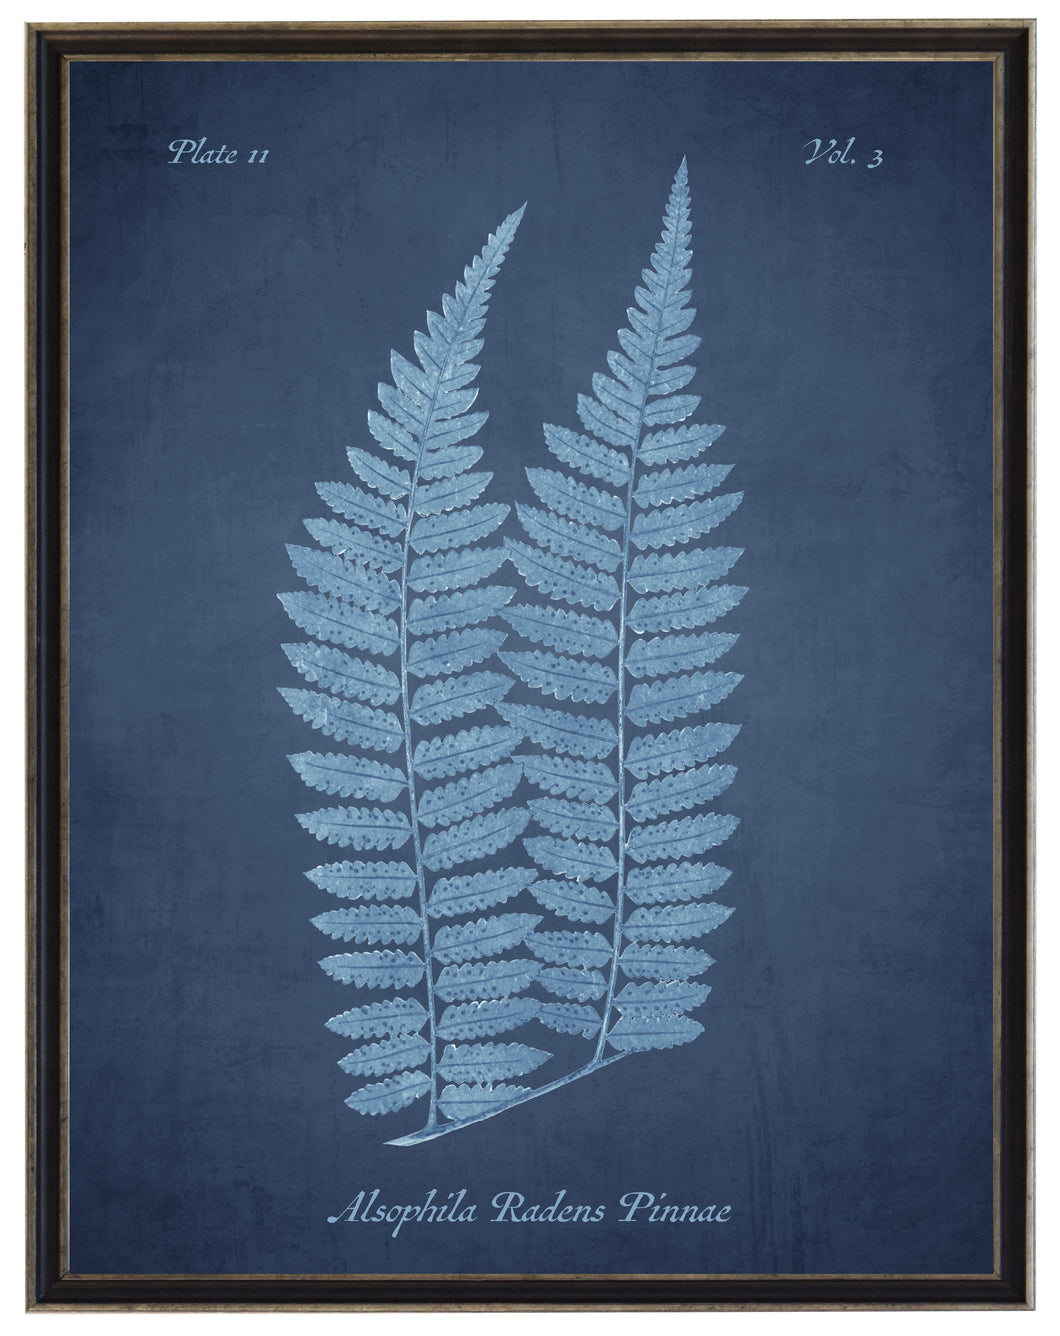 Blue Fern on Navy Distressed Background | Antique Curiosities